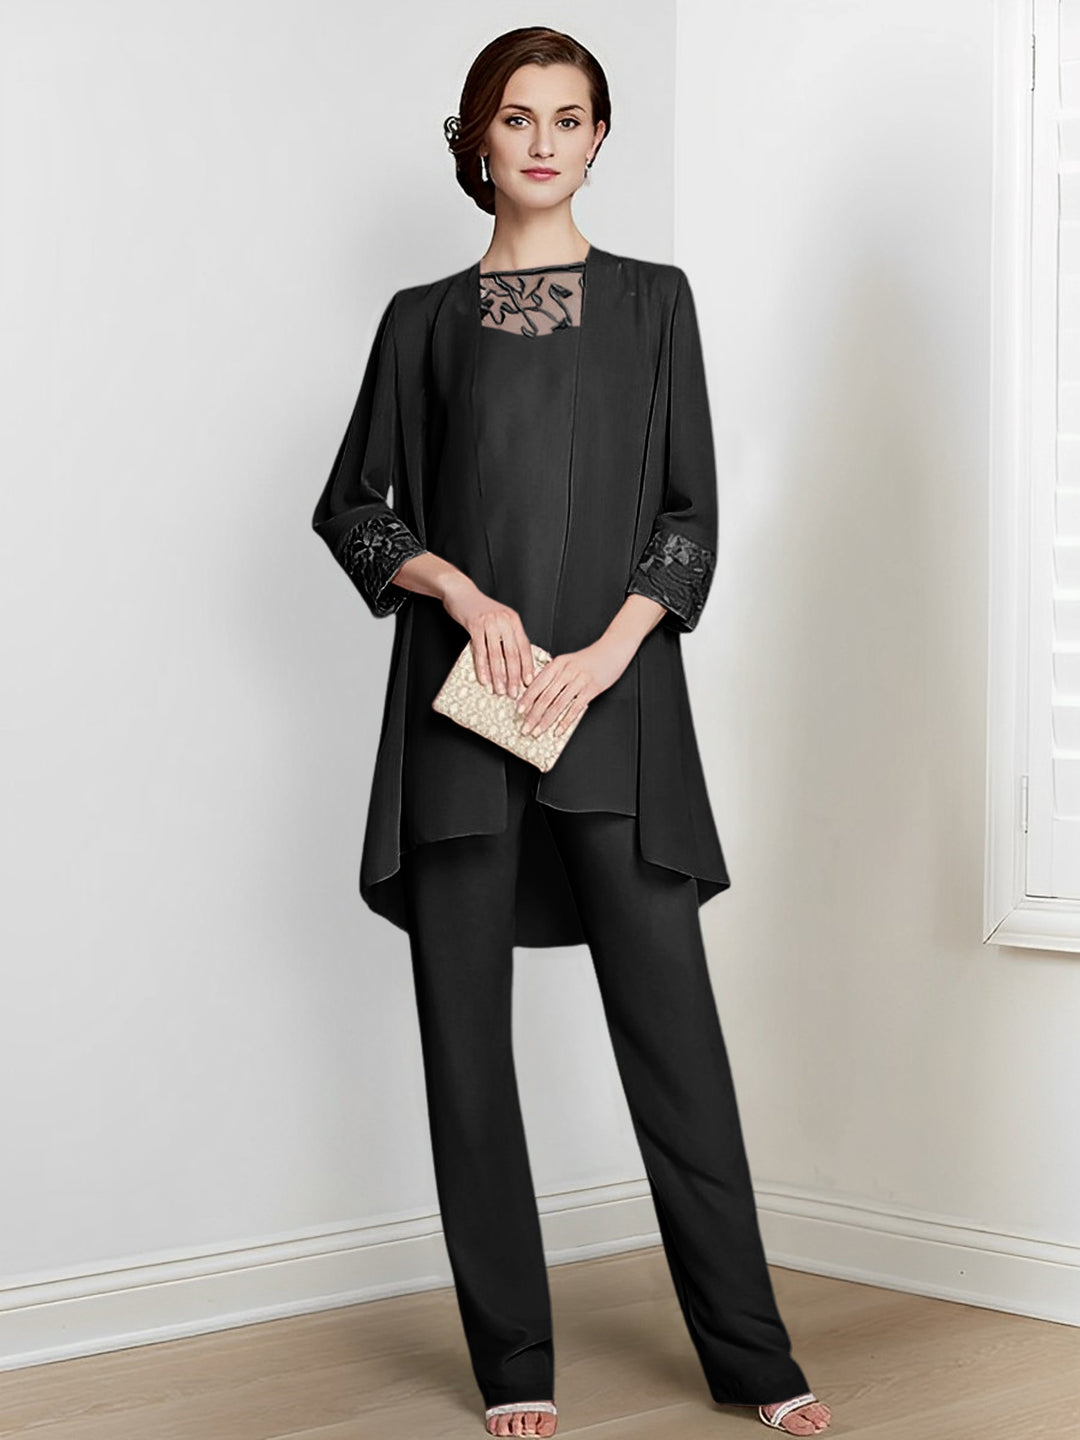 Chiffon Long Sleeves Mother Of The Bride Pantsuits With Jacket